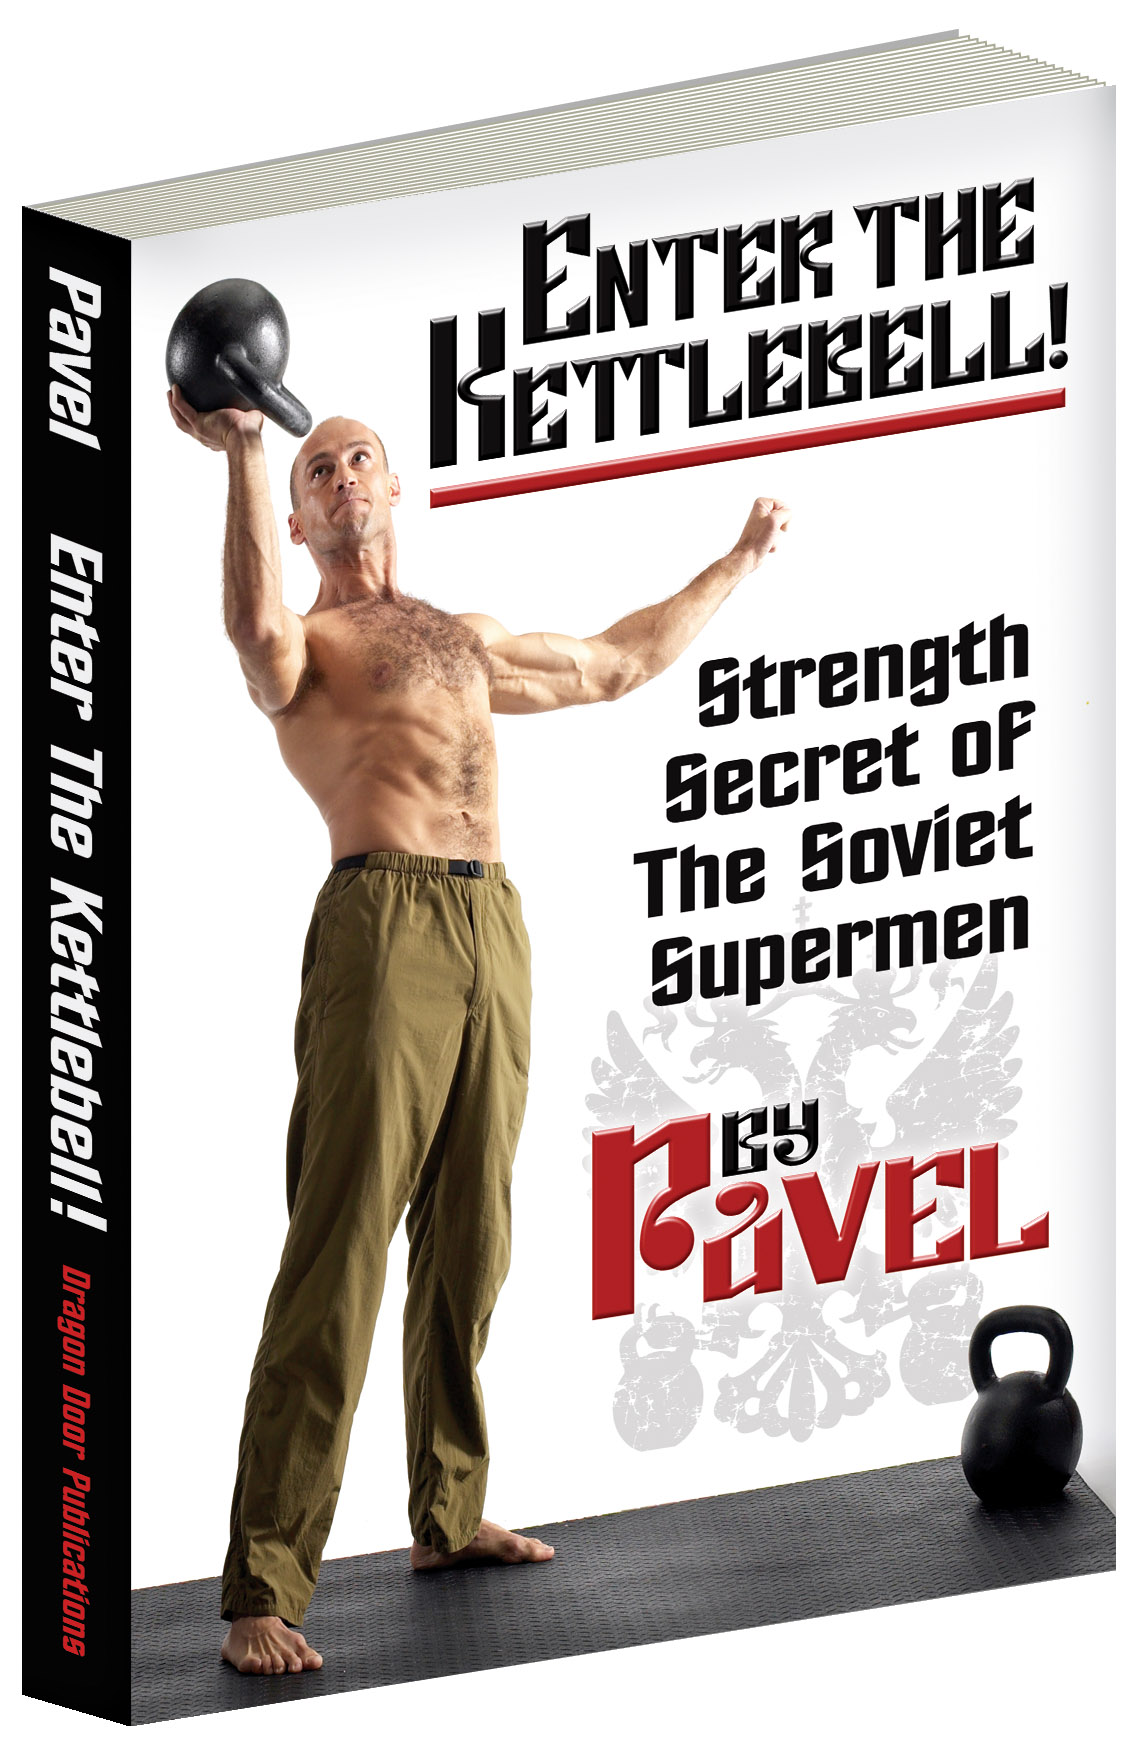 Russian Kettlebells? Why Sylvester Stallone's Rocky Balboa Used a Mysterious "Cannonball a Handle" Get an Edge in his Fight Against Heavyweight Champion of the World